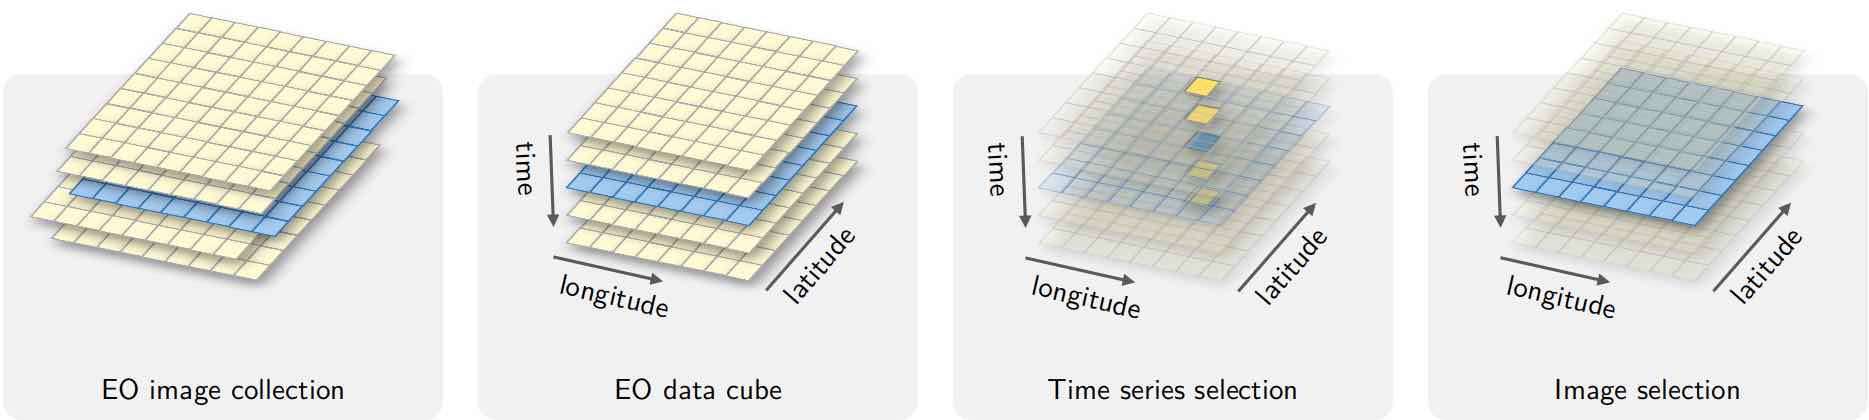 Conceptual view of data cubes (source: authors)